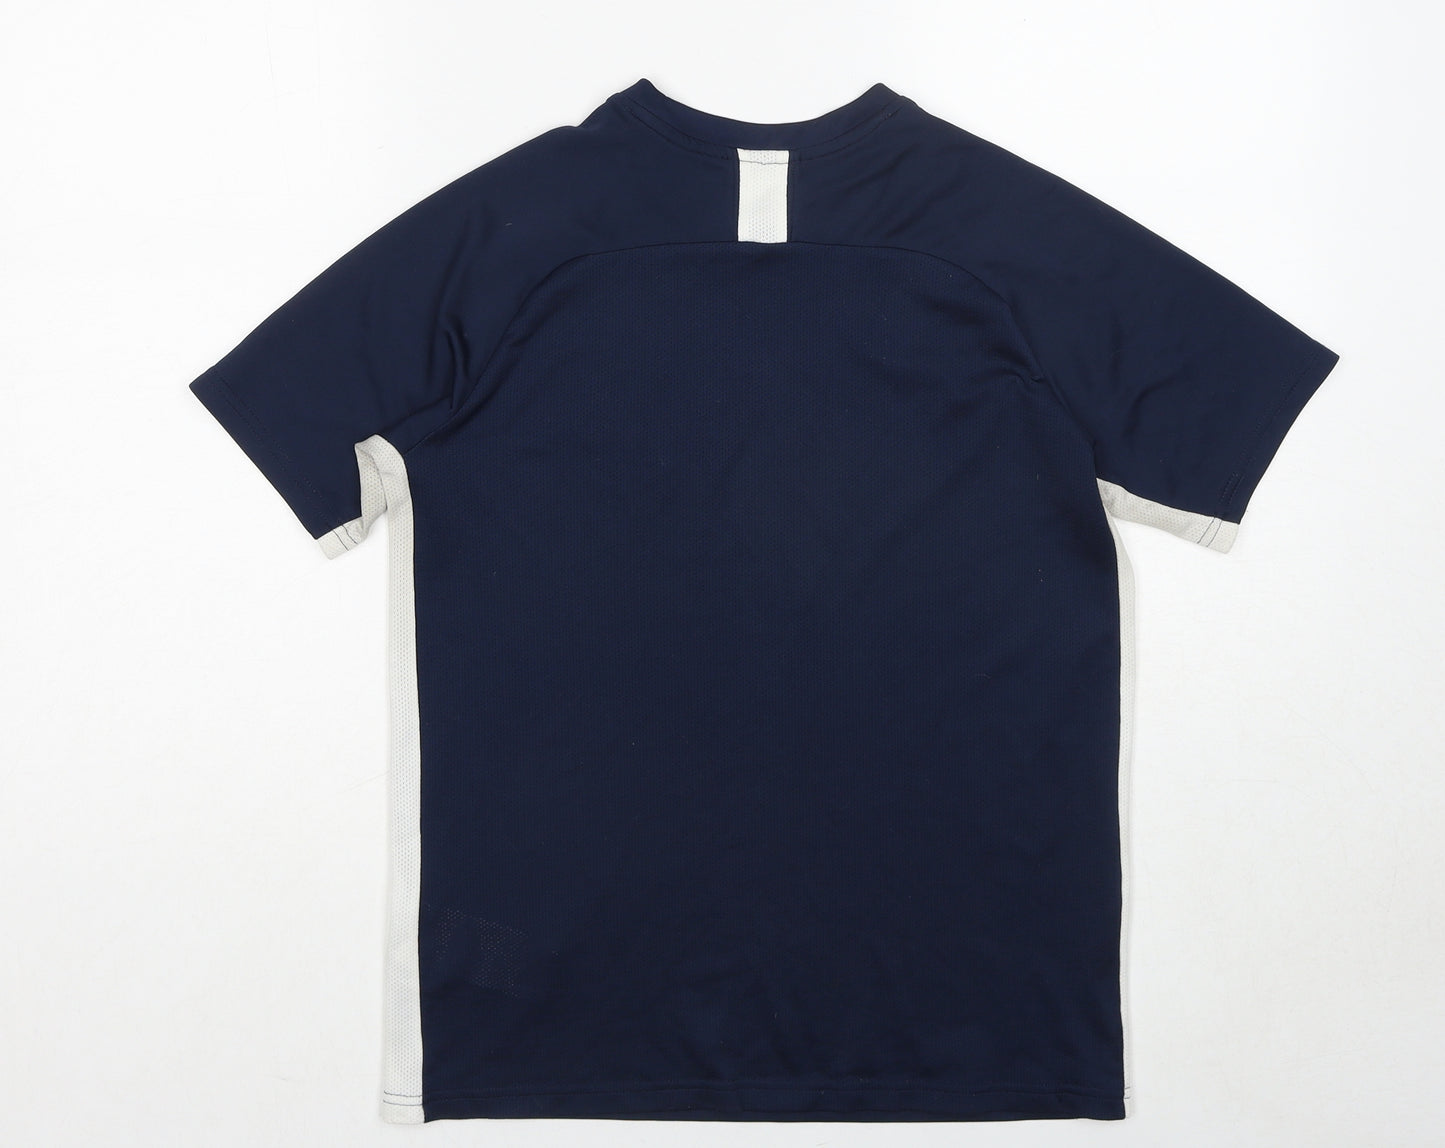 Nike Boys Blue Polyester Basic T-Shirt Size 13-14 Years Round Neck Pullover